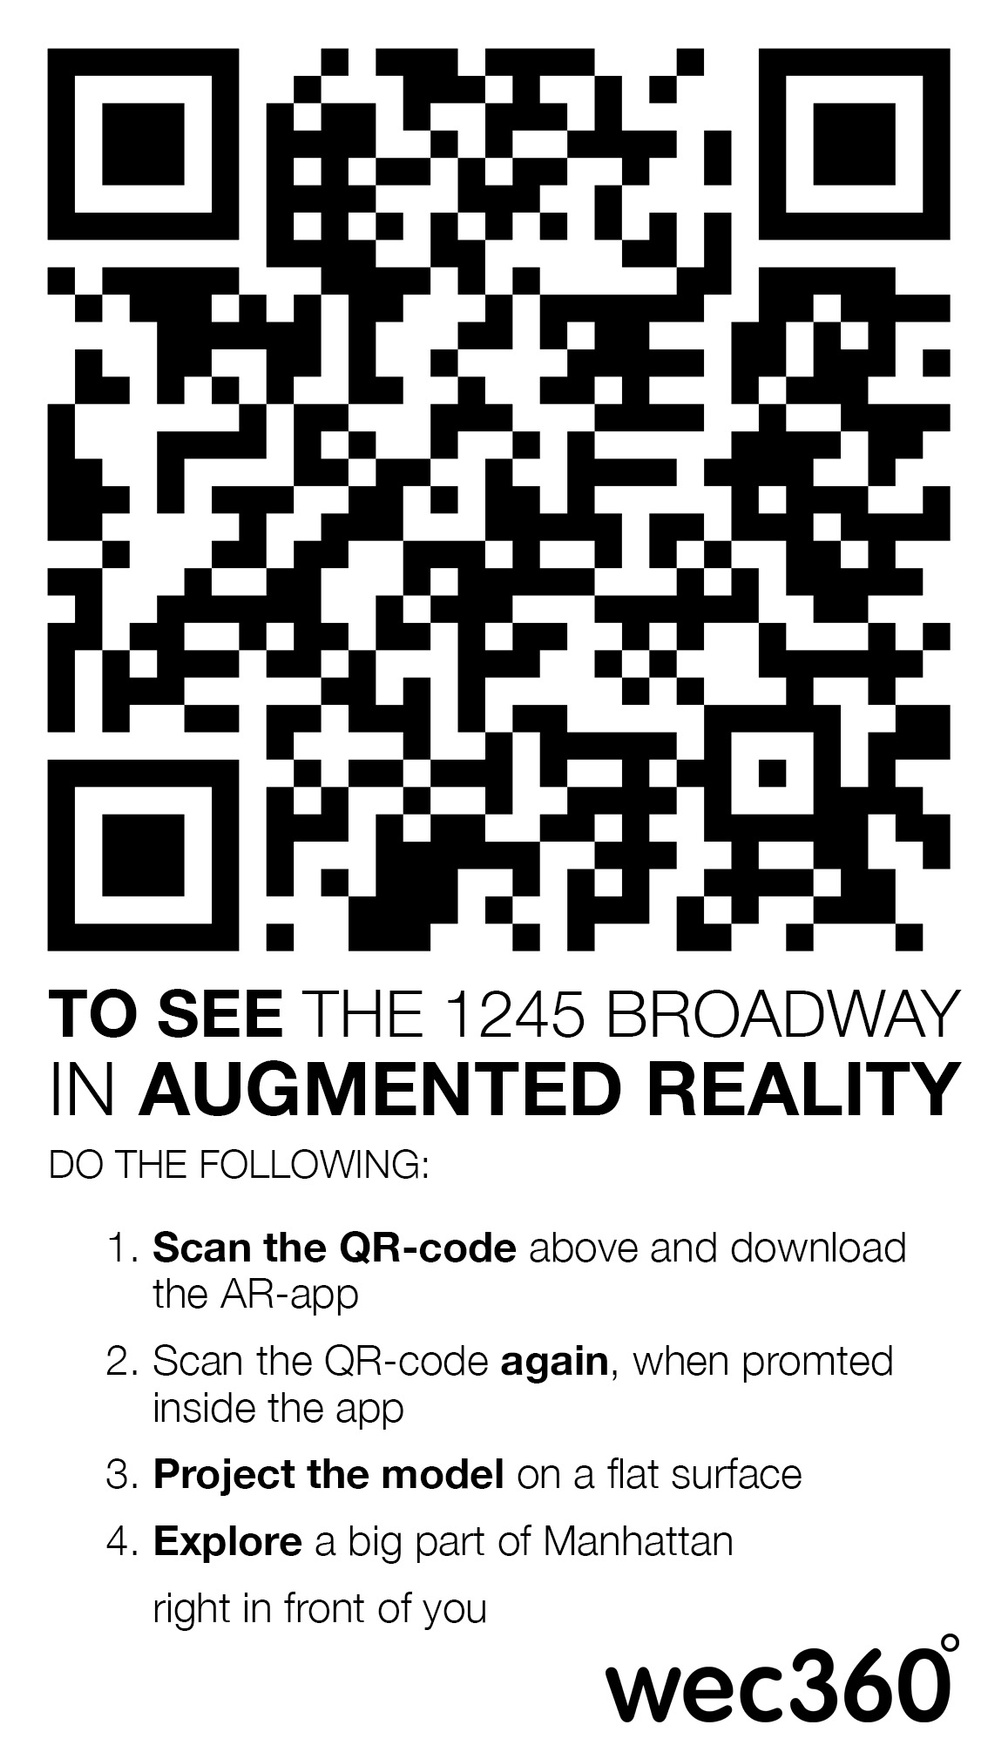 Scan the QR-code using your tablet or phone, and get to explore a major part of Manhattan using wec360°:s AR.